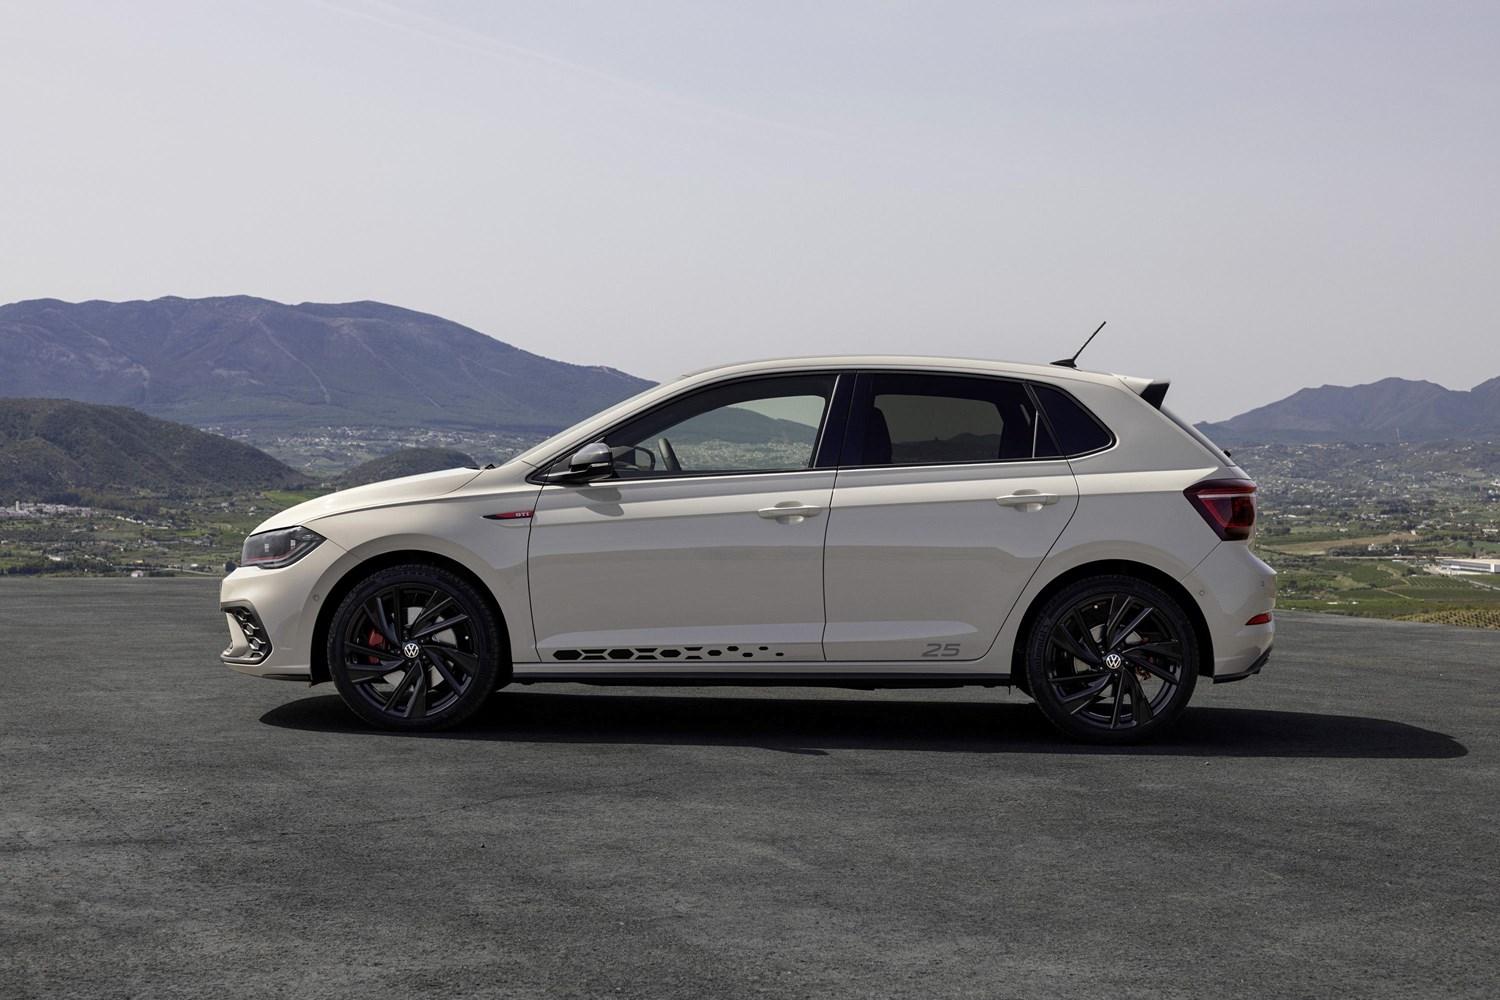 Side view of the new Volkswagen Polo in white, parked with mountain views behind